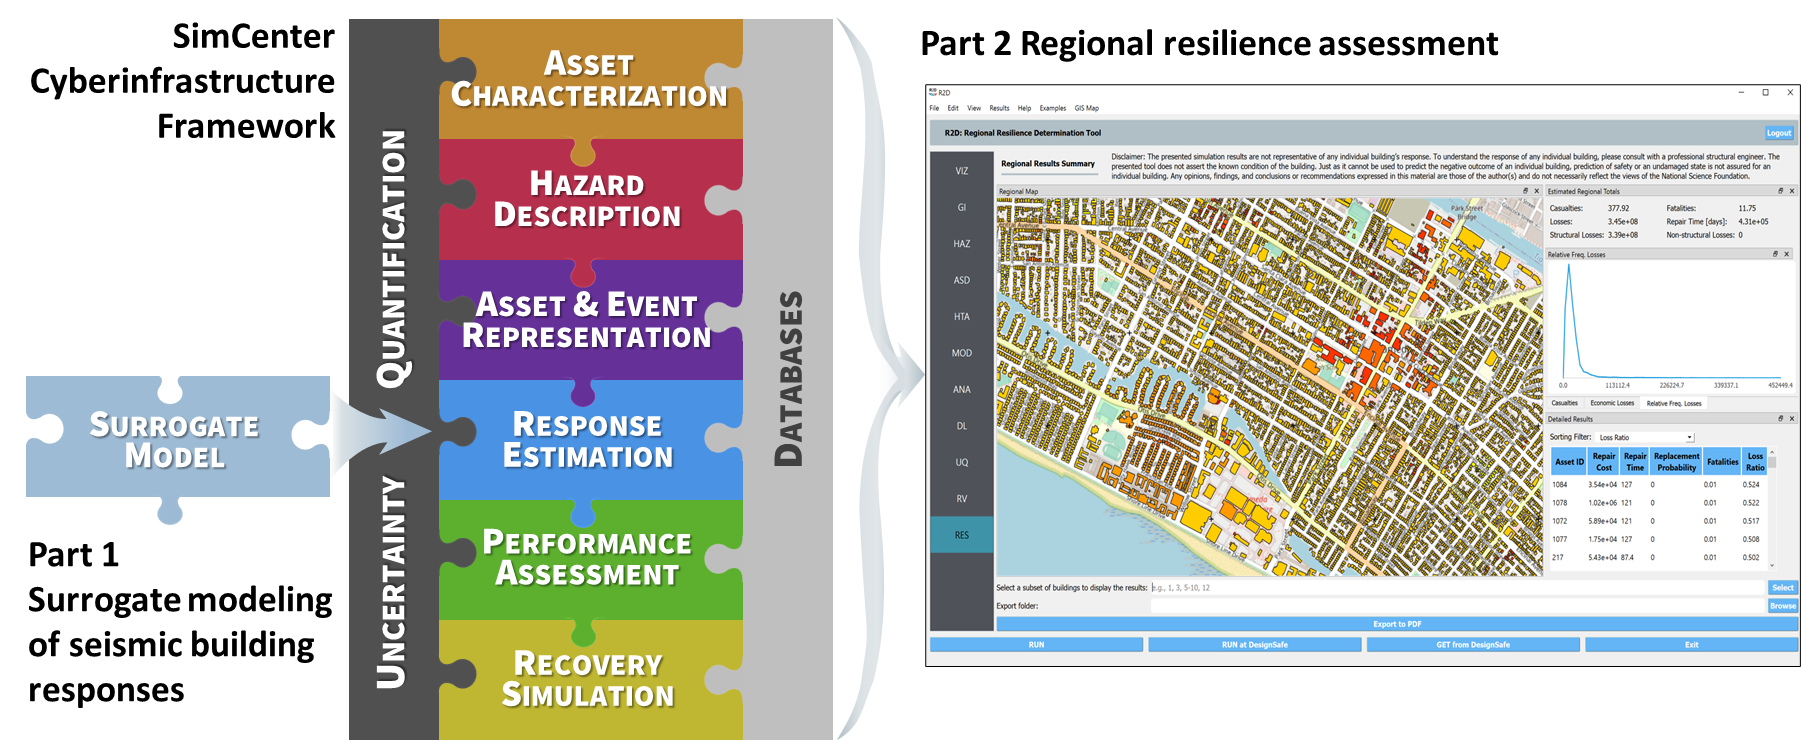 image from webinar hosted by the UNESCO Chair in Disaster Risk Reduction and Resilience Engineering at University College London